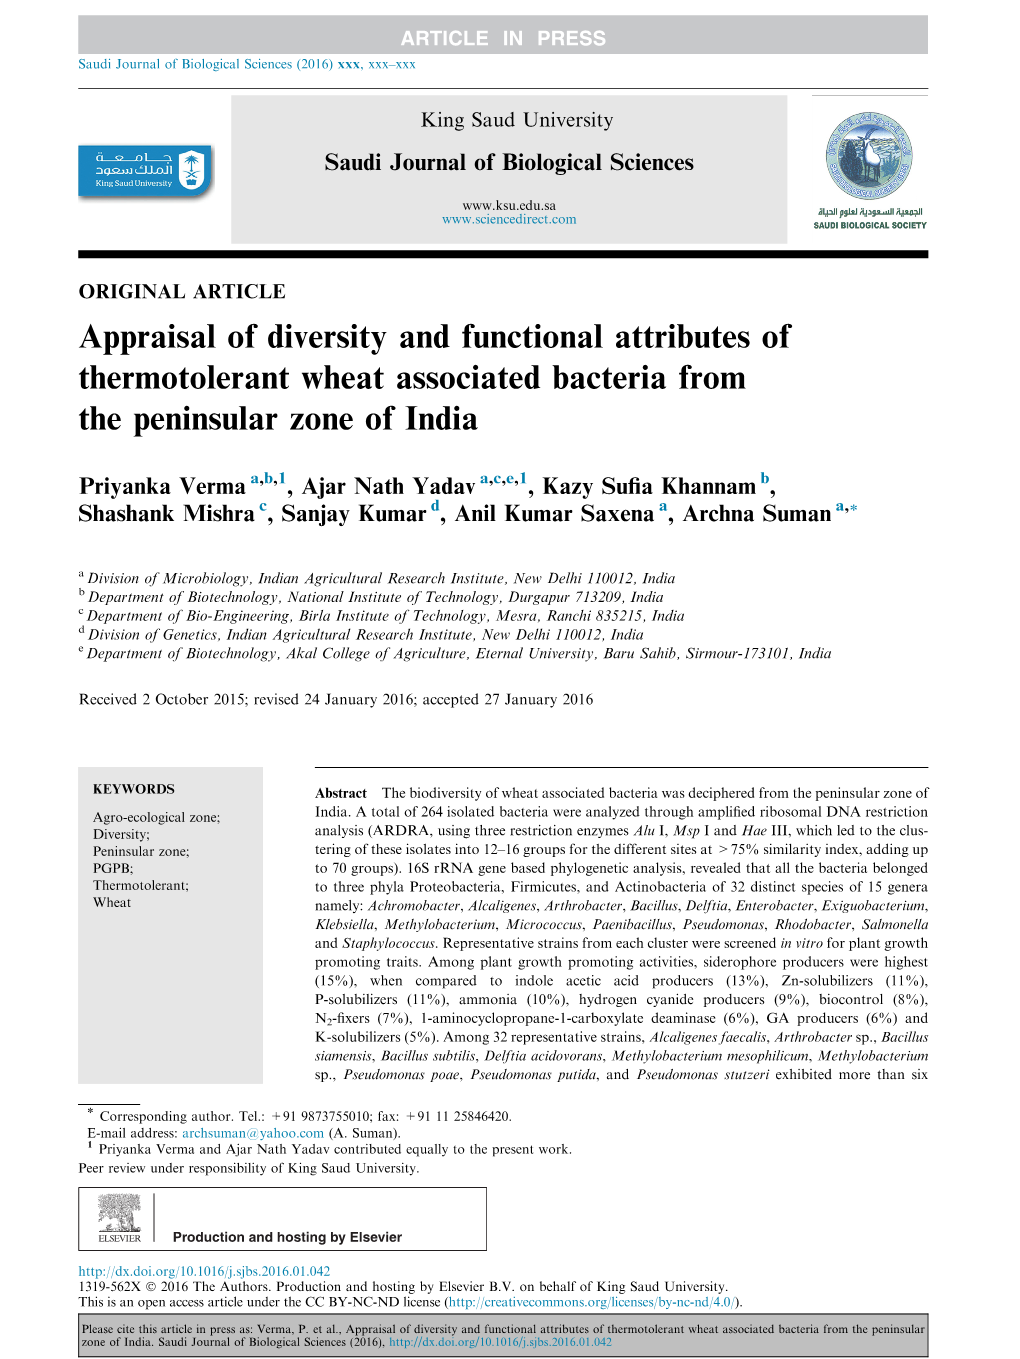 Appraisal of Diversity and Functional Attributes of Thermotolerant Wheat Associated Bacteria from the Peninsular Zone of India